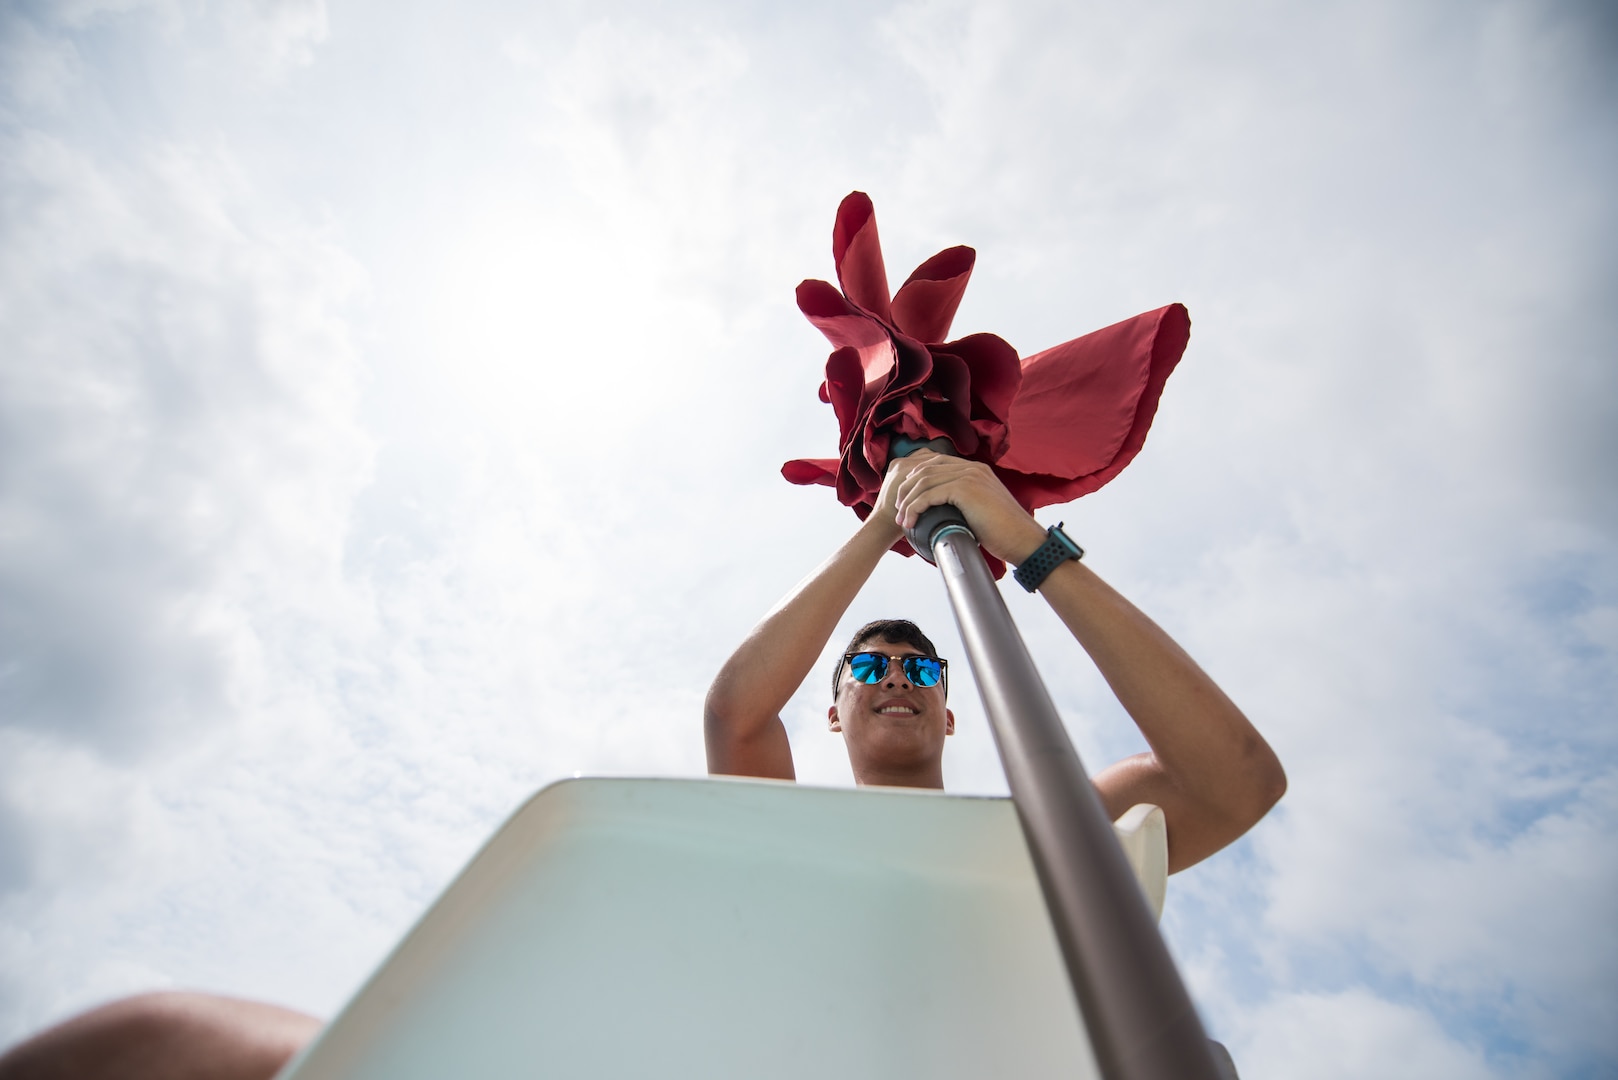 Eric Medelez, 502nd Force Support Squadron lifeguard, aged 17 and son of Master Sgt. Martha Vasquez-Medelez, 149th Fighter Wing, does his morning checks before opening the Warhawk pool, June 21, 2019, at Joint Base San Antonio-Lackland, Texas.